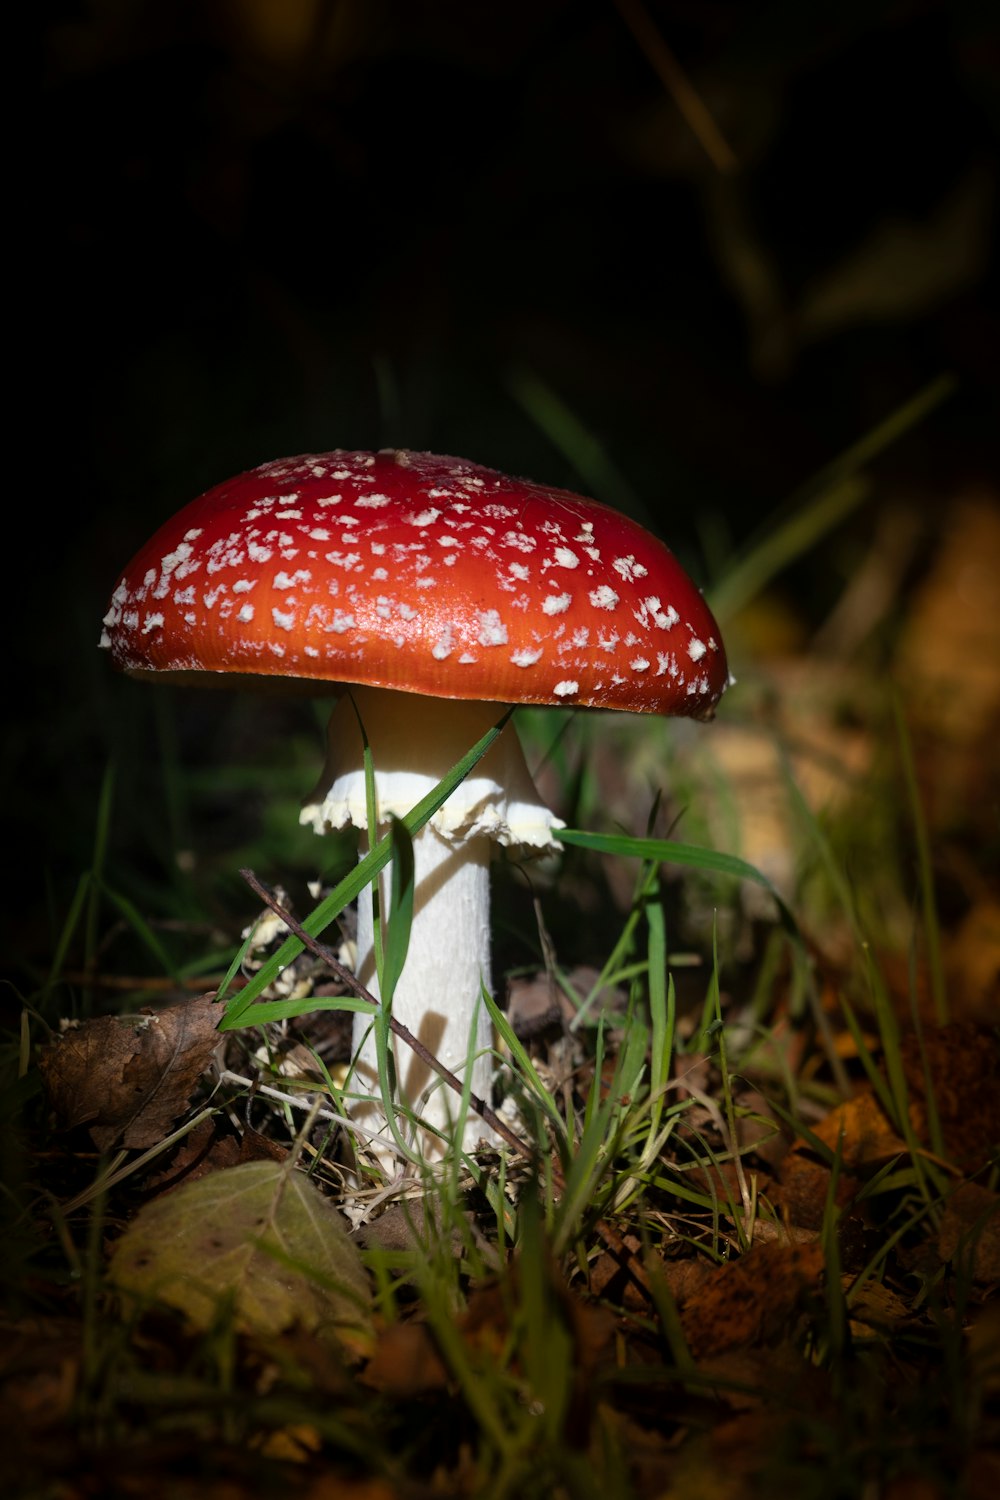 a red mushroom growing in the grass